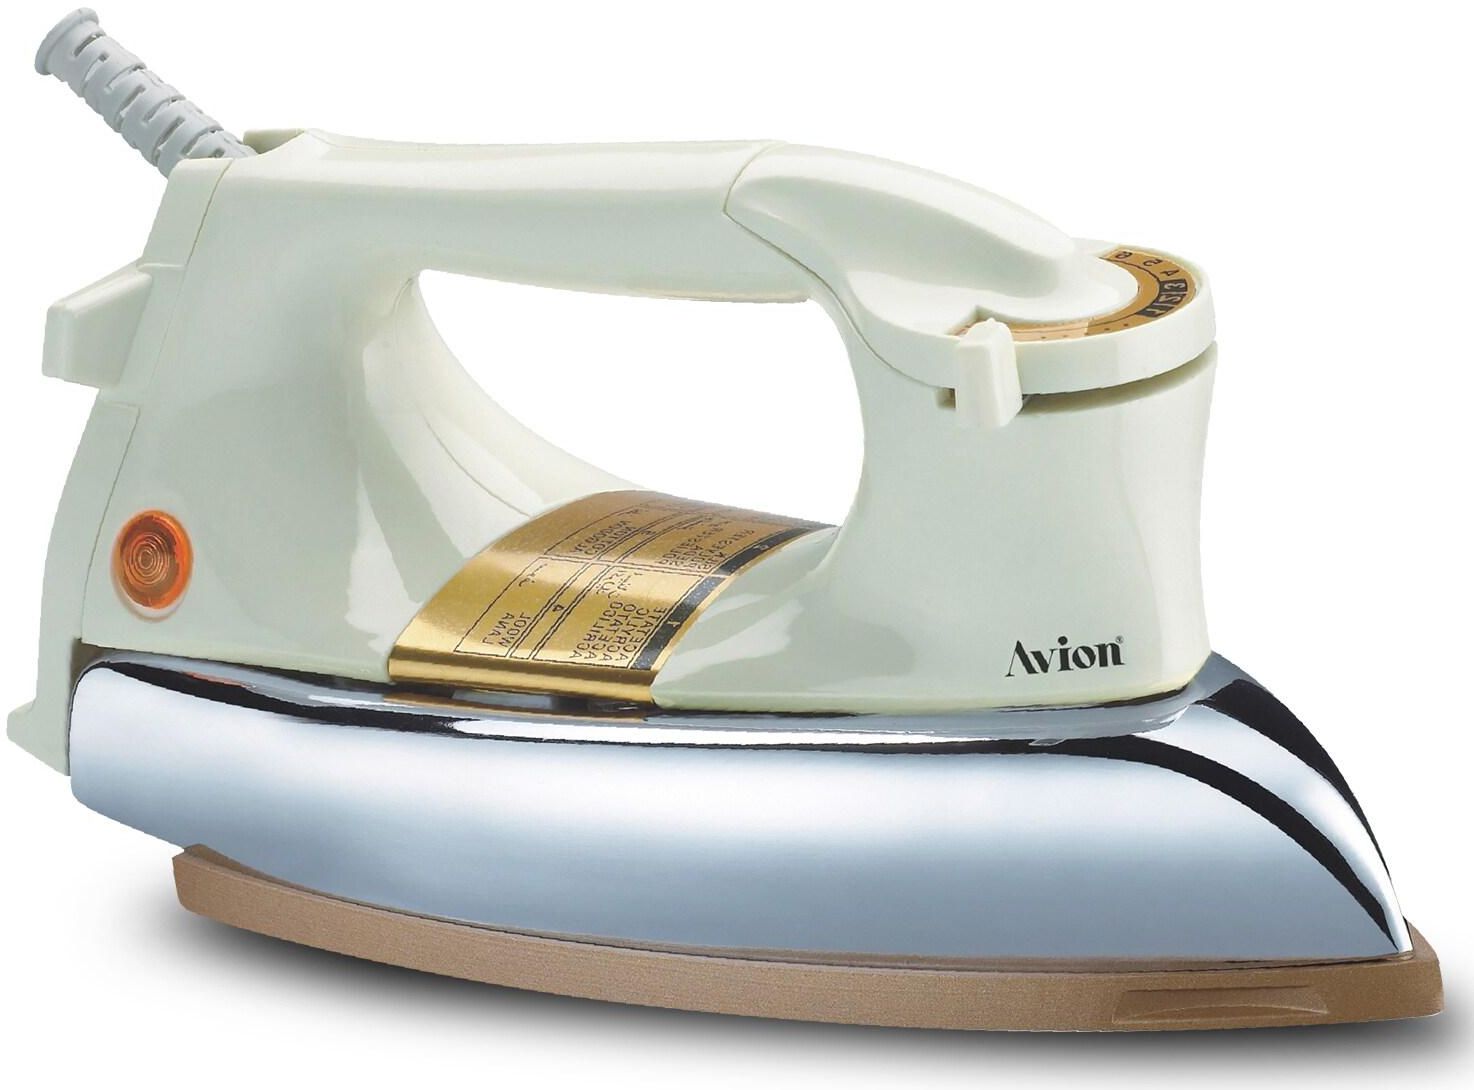 Avion 1200W Automatic Dry Iron - Electric Iron 60 Micron Ceramic Coated Sole Plate, Durable Automatic Weight Iron Box, Auto Shut Off, Temperature Setting Dial, Overheat Protection, Ahw23Di